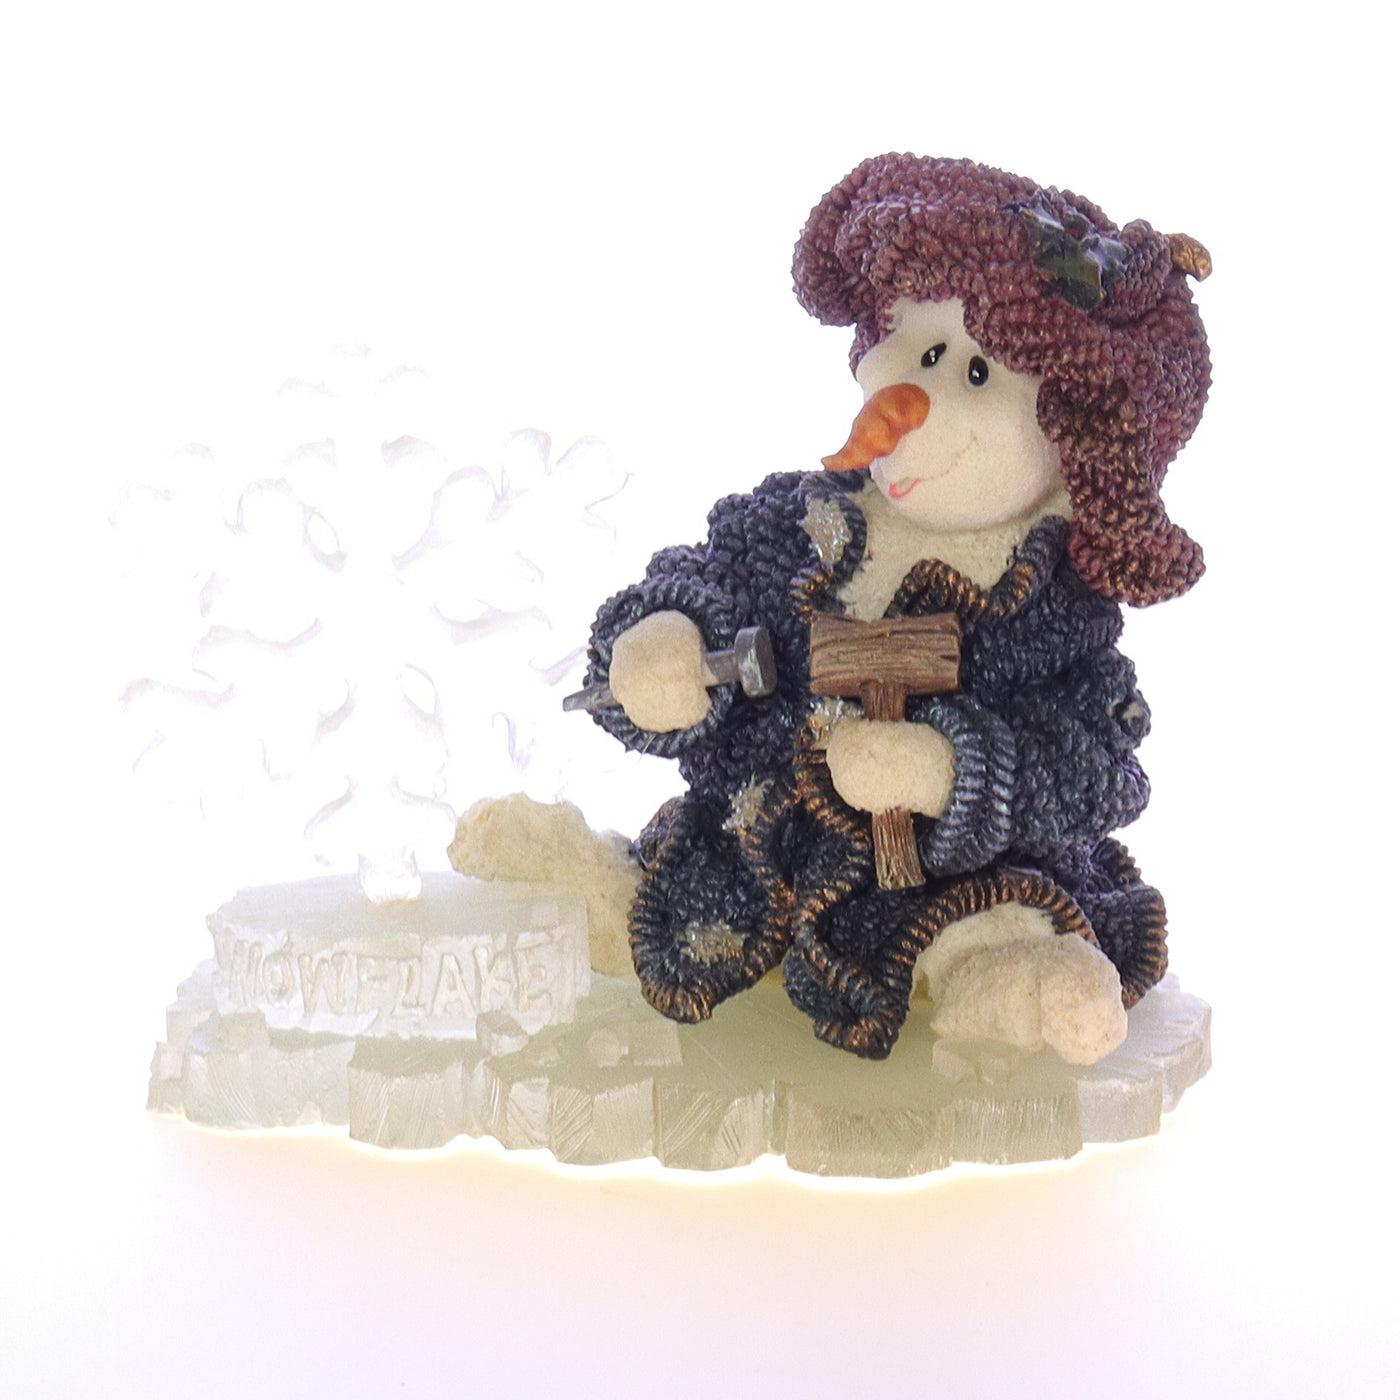 The_Wee_Folkstone_Collection_36504_Flakey_Ice_Sculptor_Christmas_Figurine_1998 Front View